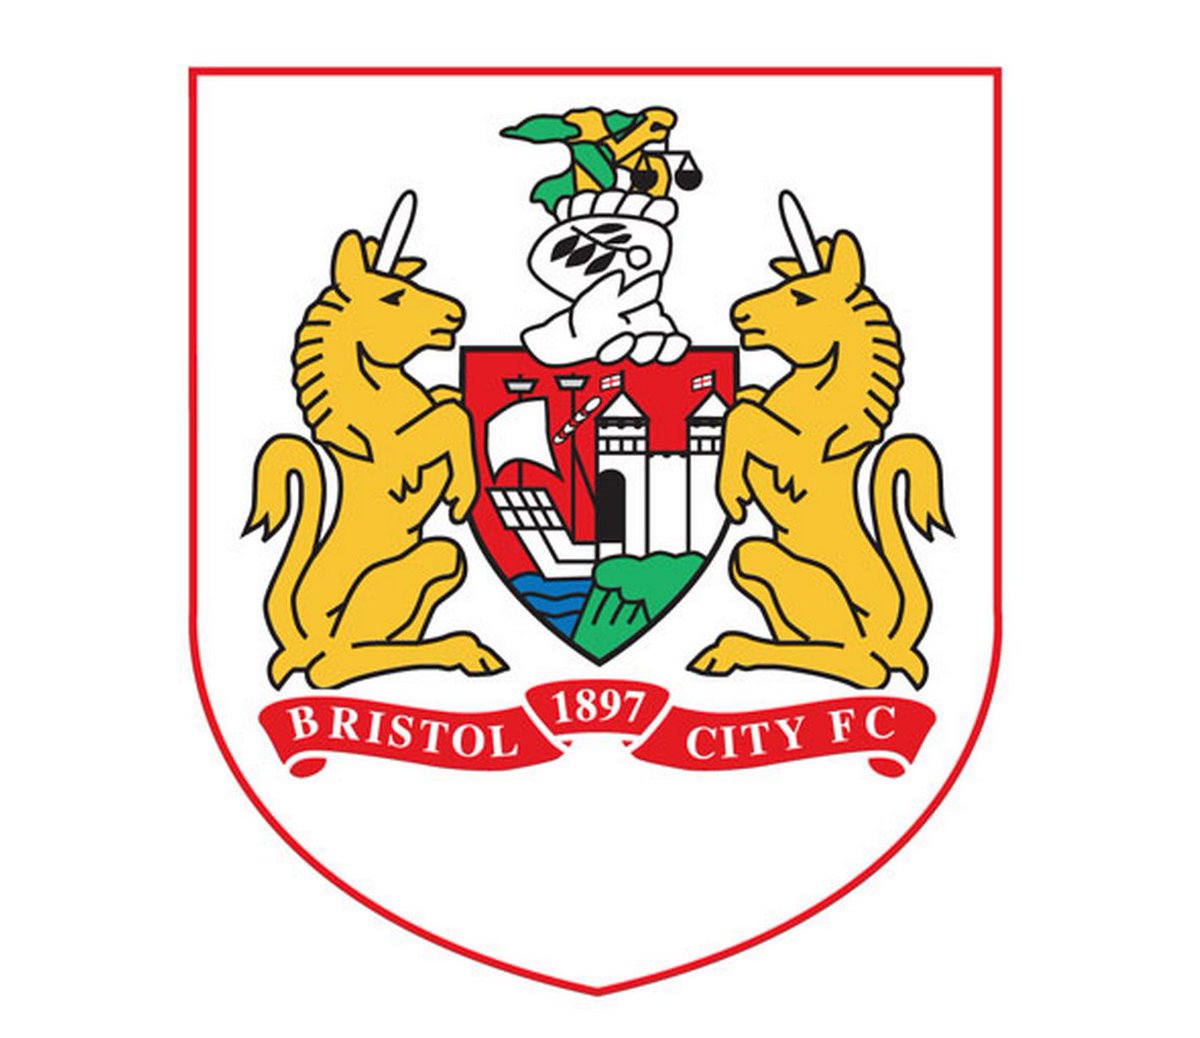 Bristol City are nicknamed the robins and now there is a robin on their badge